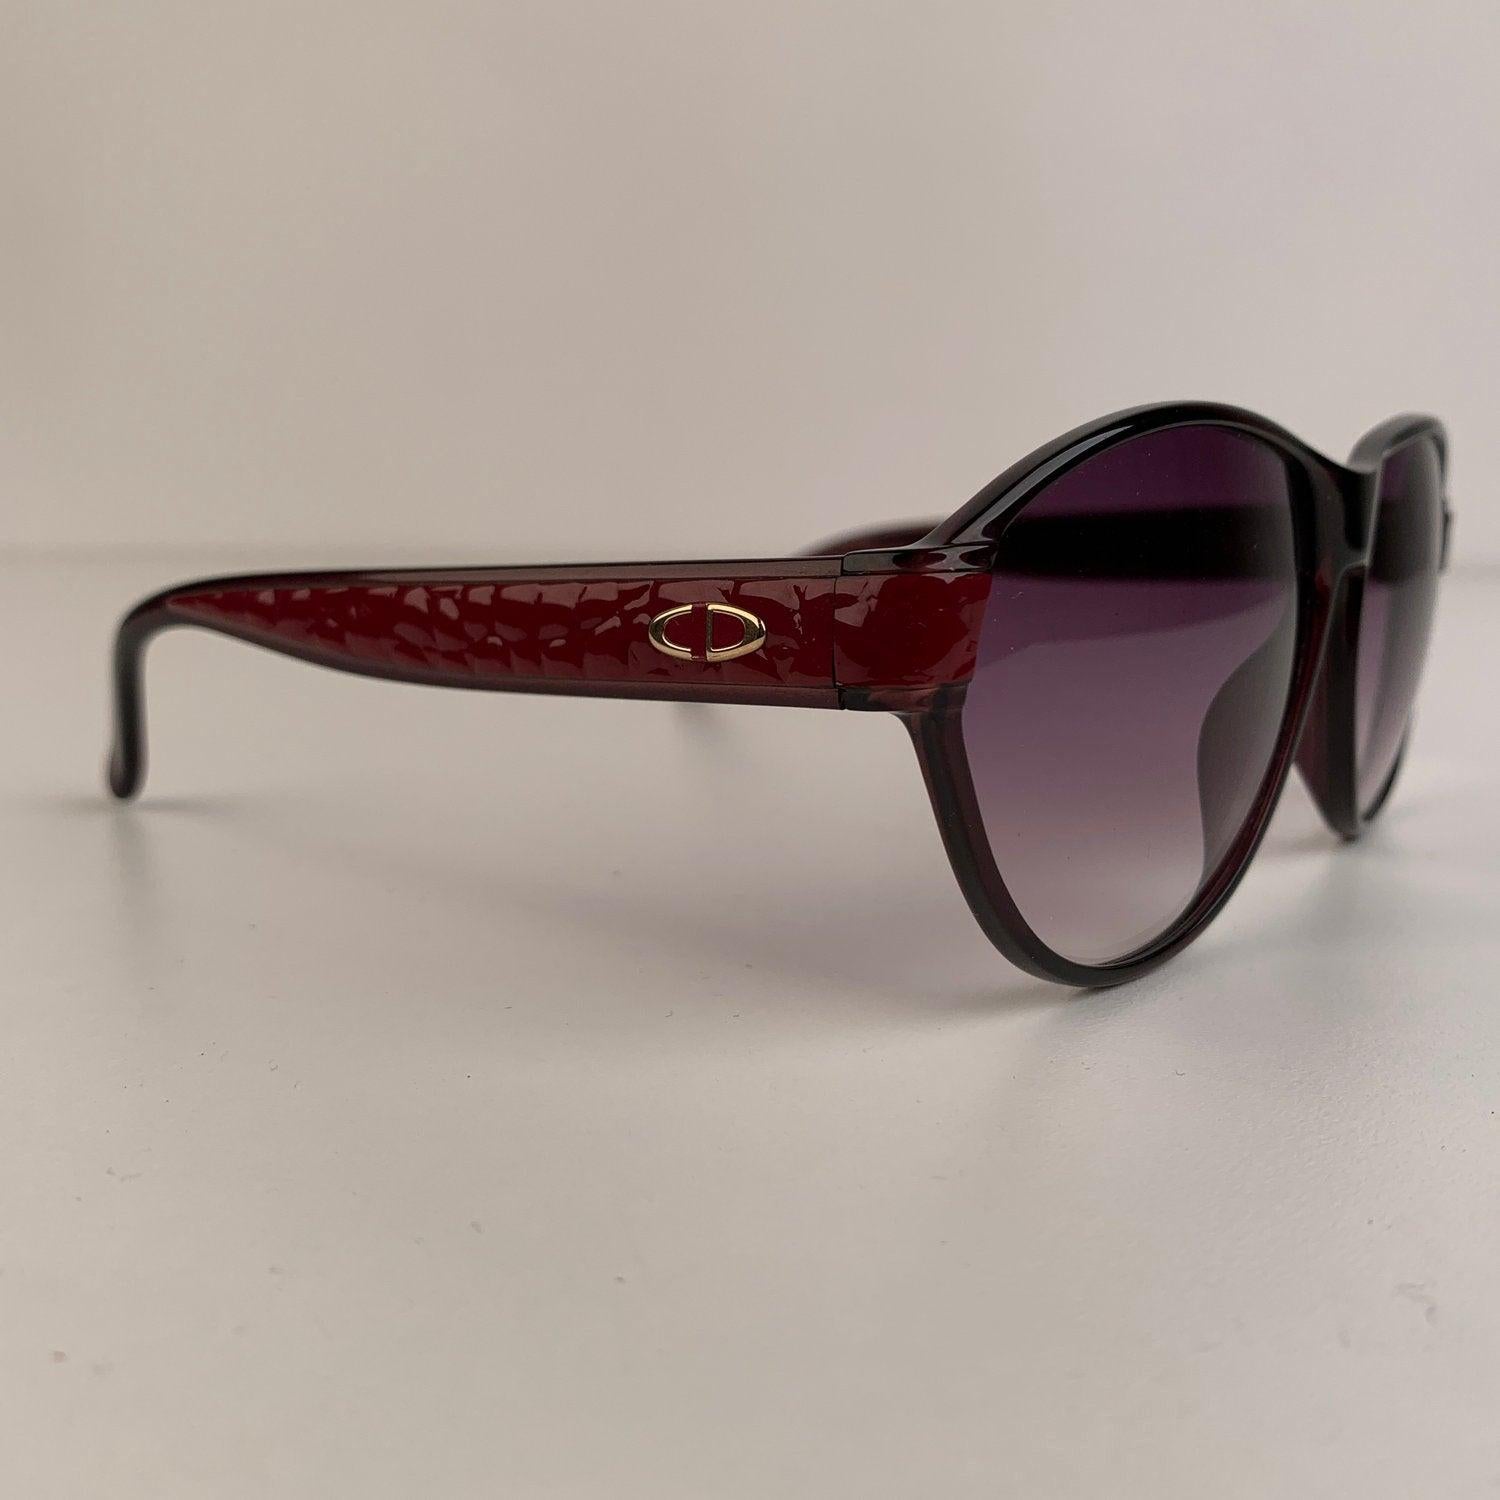 Christian Dior Vintage Black Burgundy Optyl Sunglasses Mod 2325 In Excellent Condition For Sale In Rome, Rome